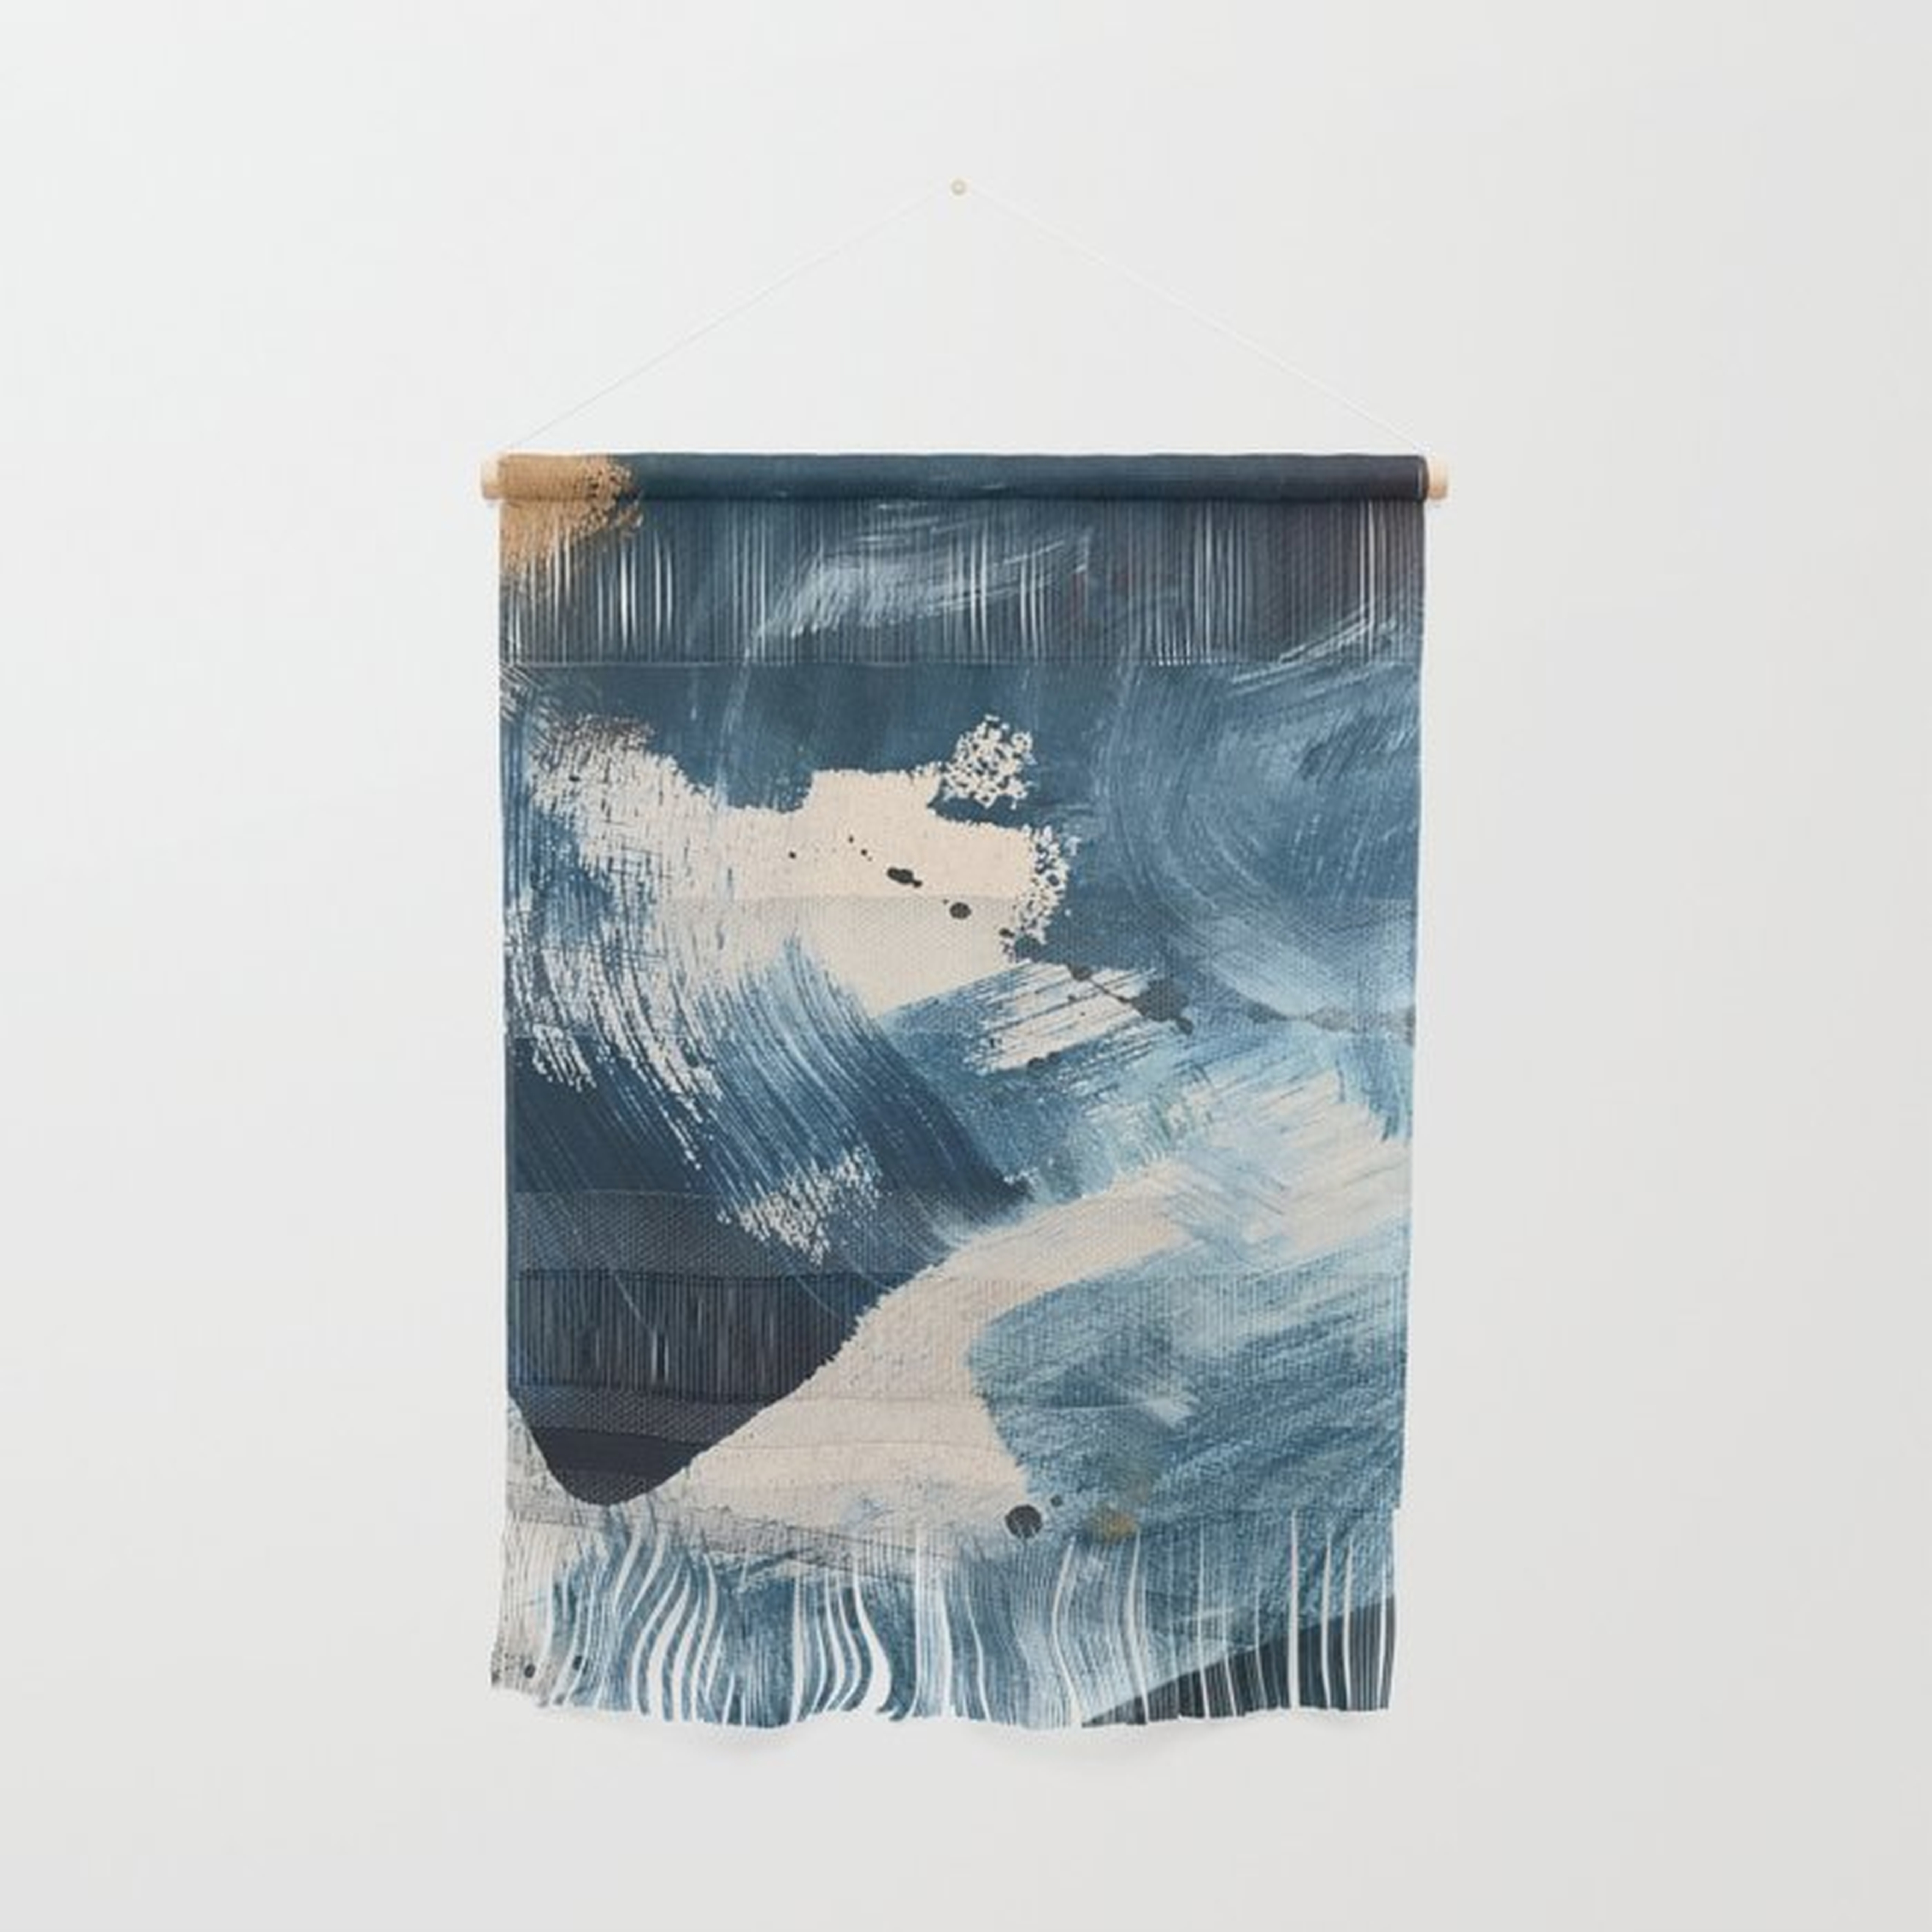 Against The Current: A Bold, Minimal Abstract Acrylic Piece In Blue, White And Gold Wall Hanging by Alyssa Hamilton Art - Large 23 1/4" x 31 1/2" - Society6